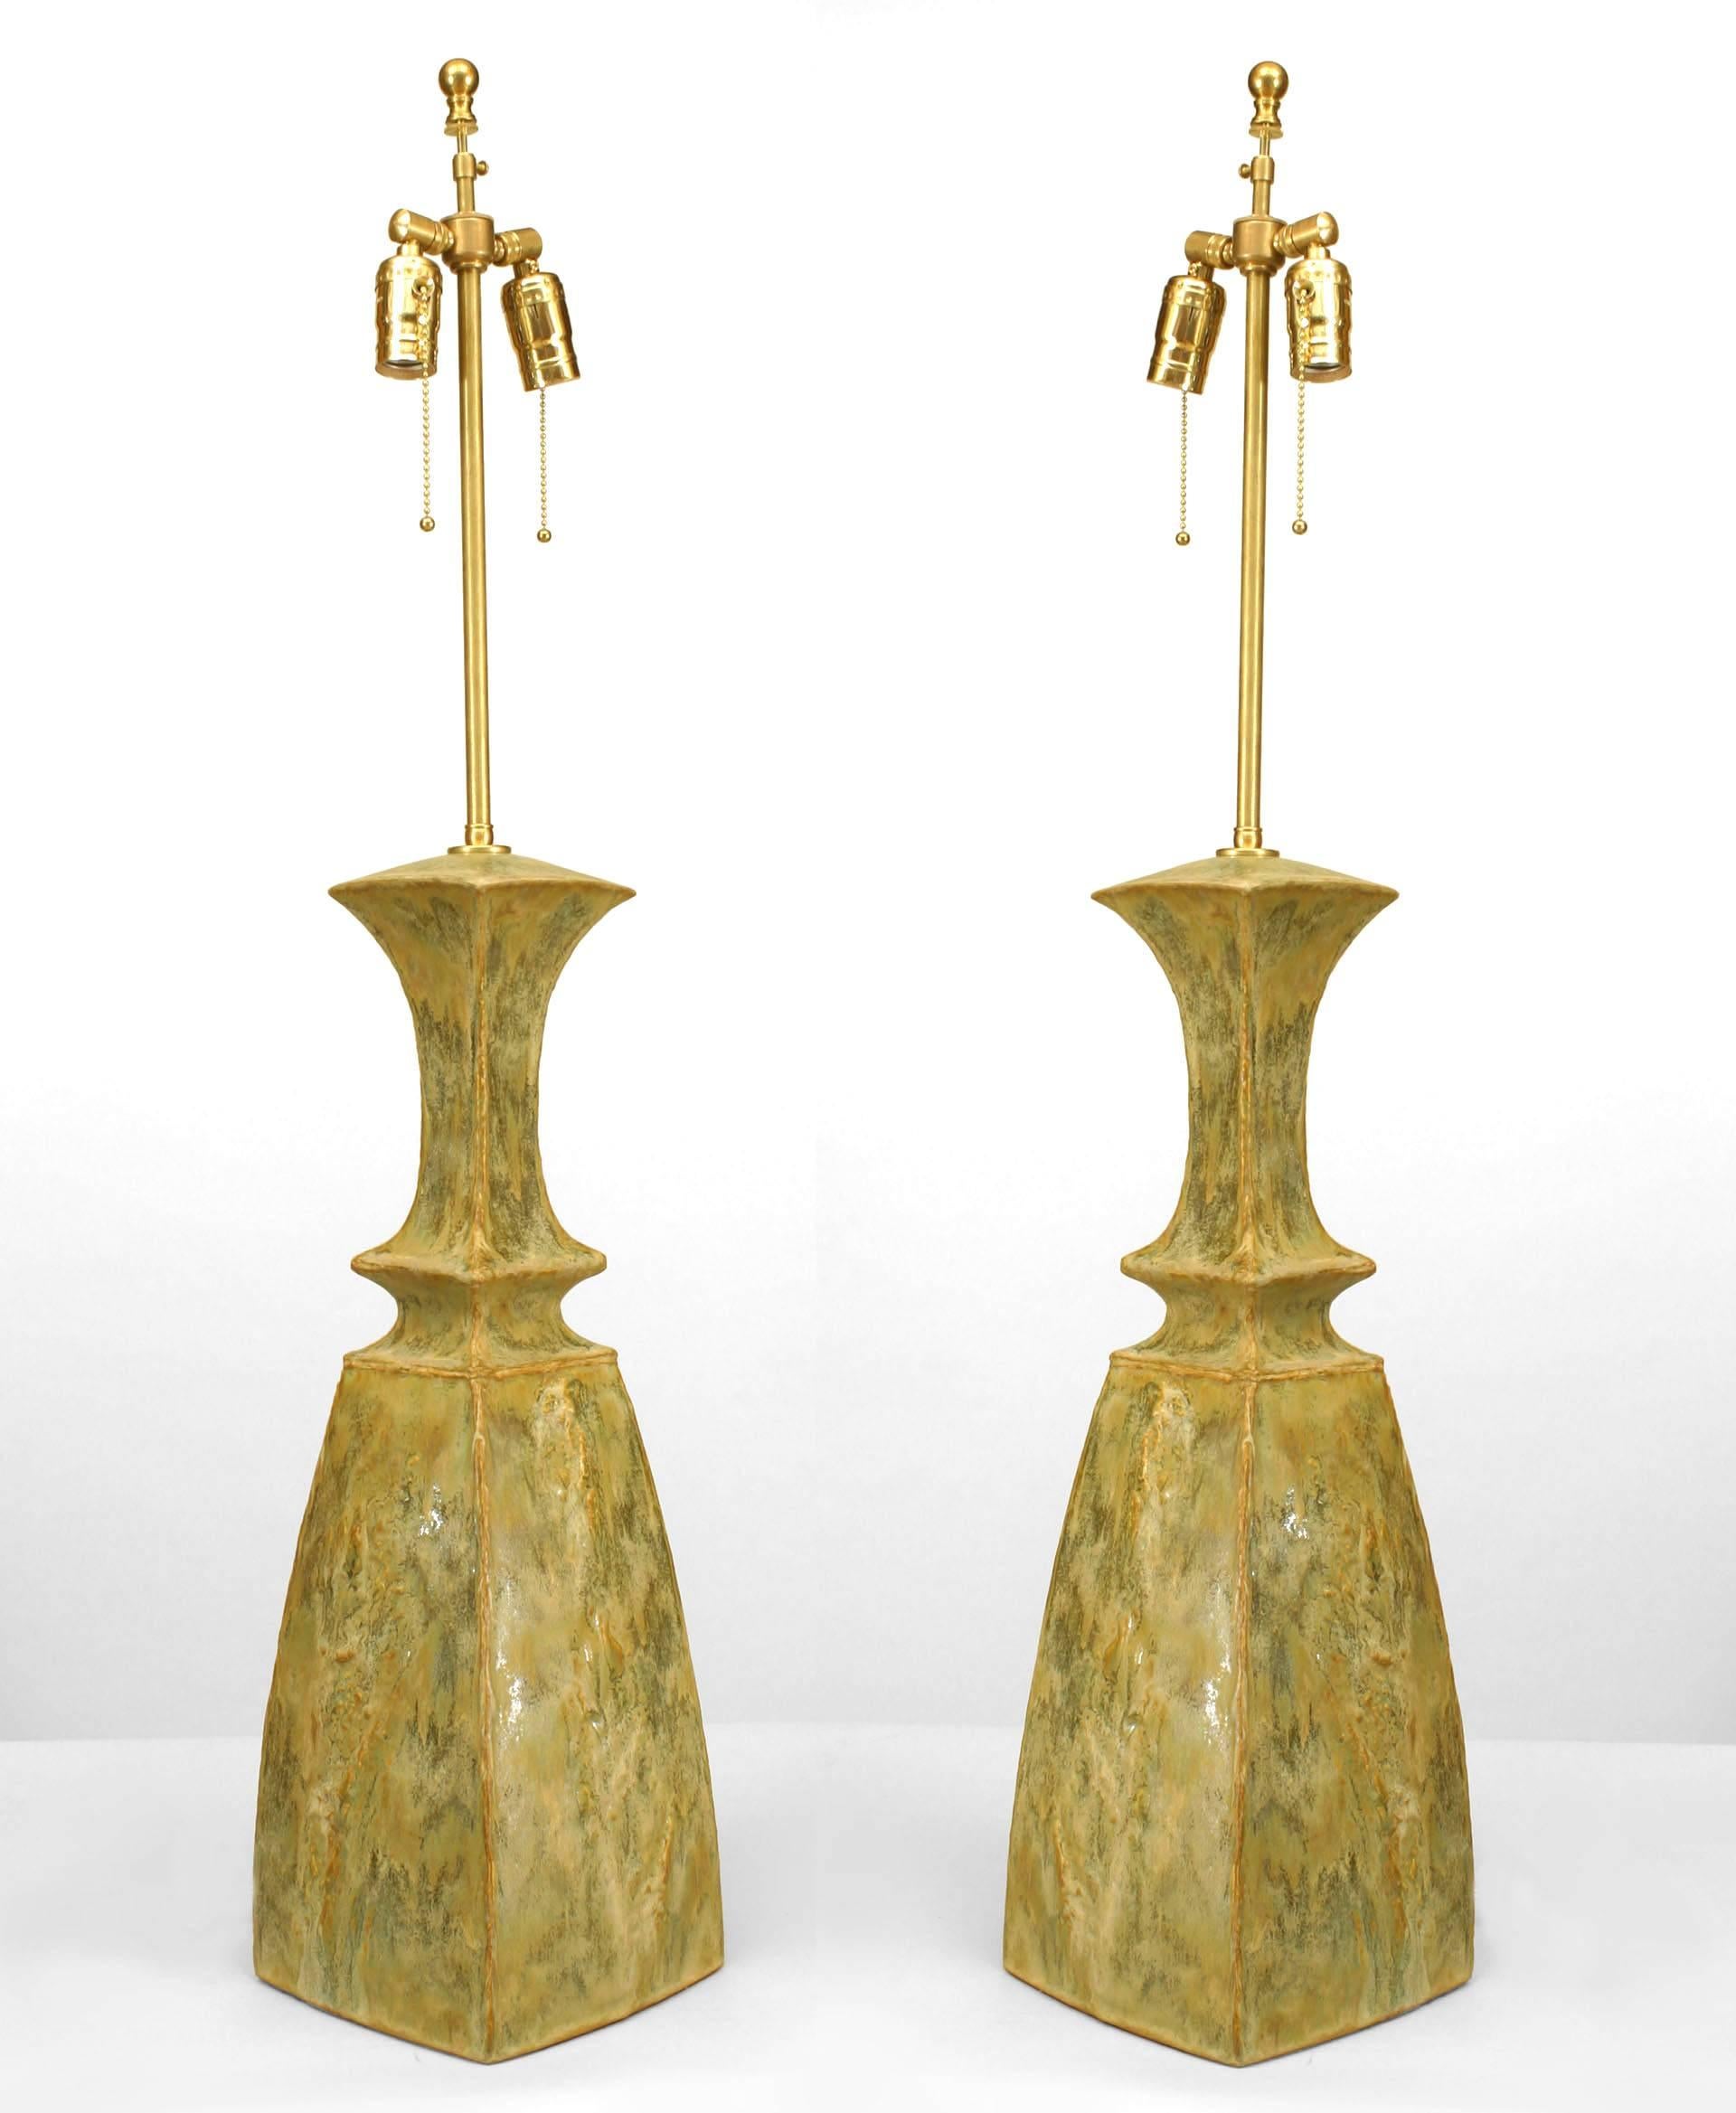 Pair of American Post War Design celadon glazed ceramic textured relief vases mounted as lamps with a tapered neck. (signed: GARY DIPASQUALE)(PRICED AS Pair).
